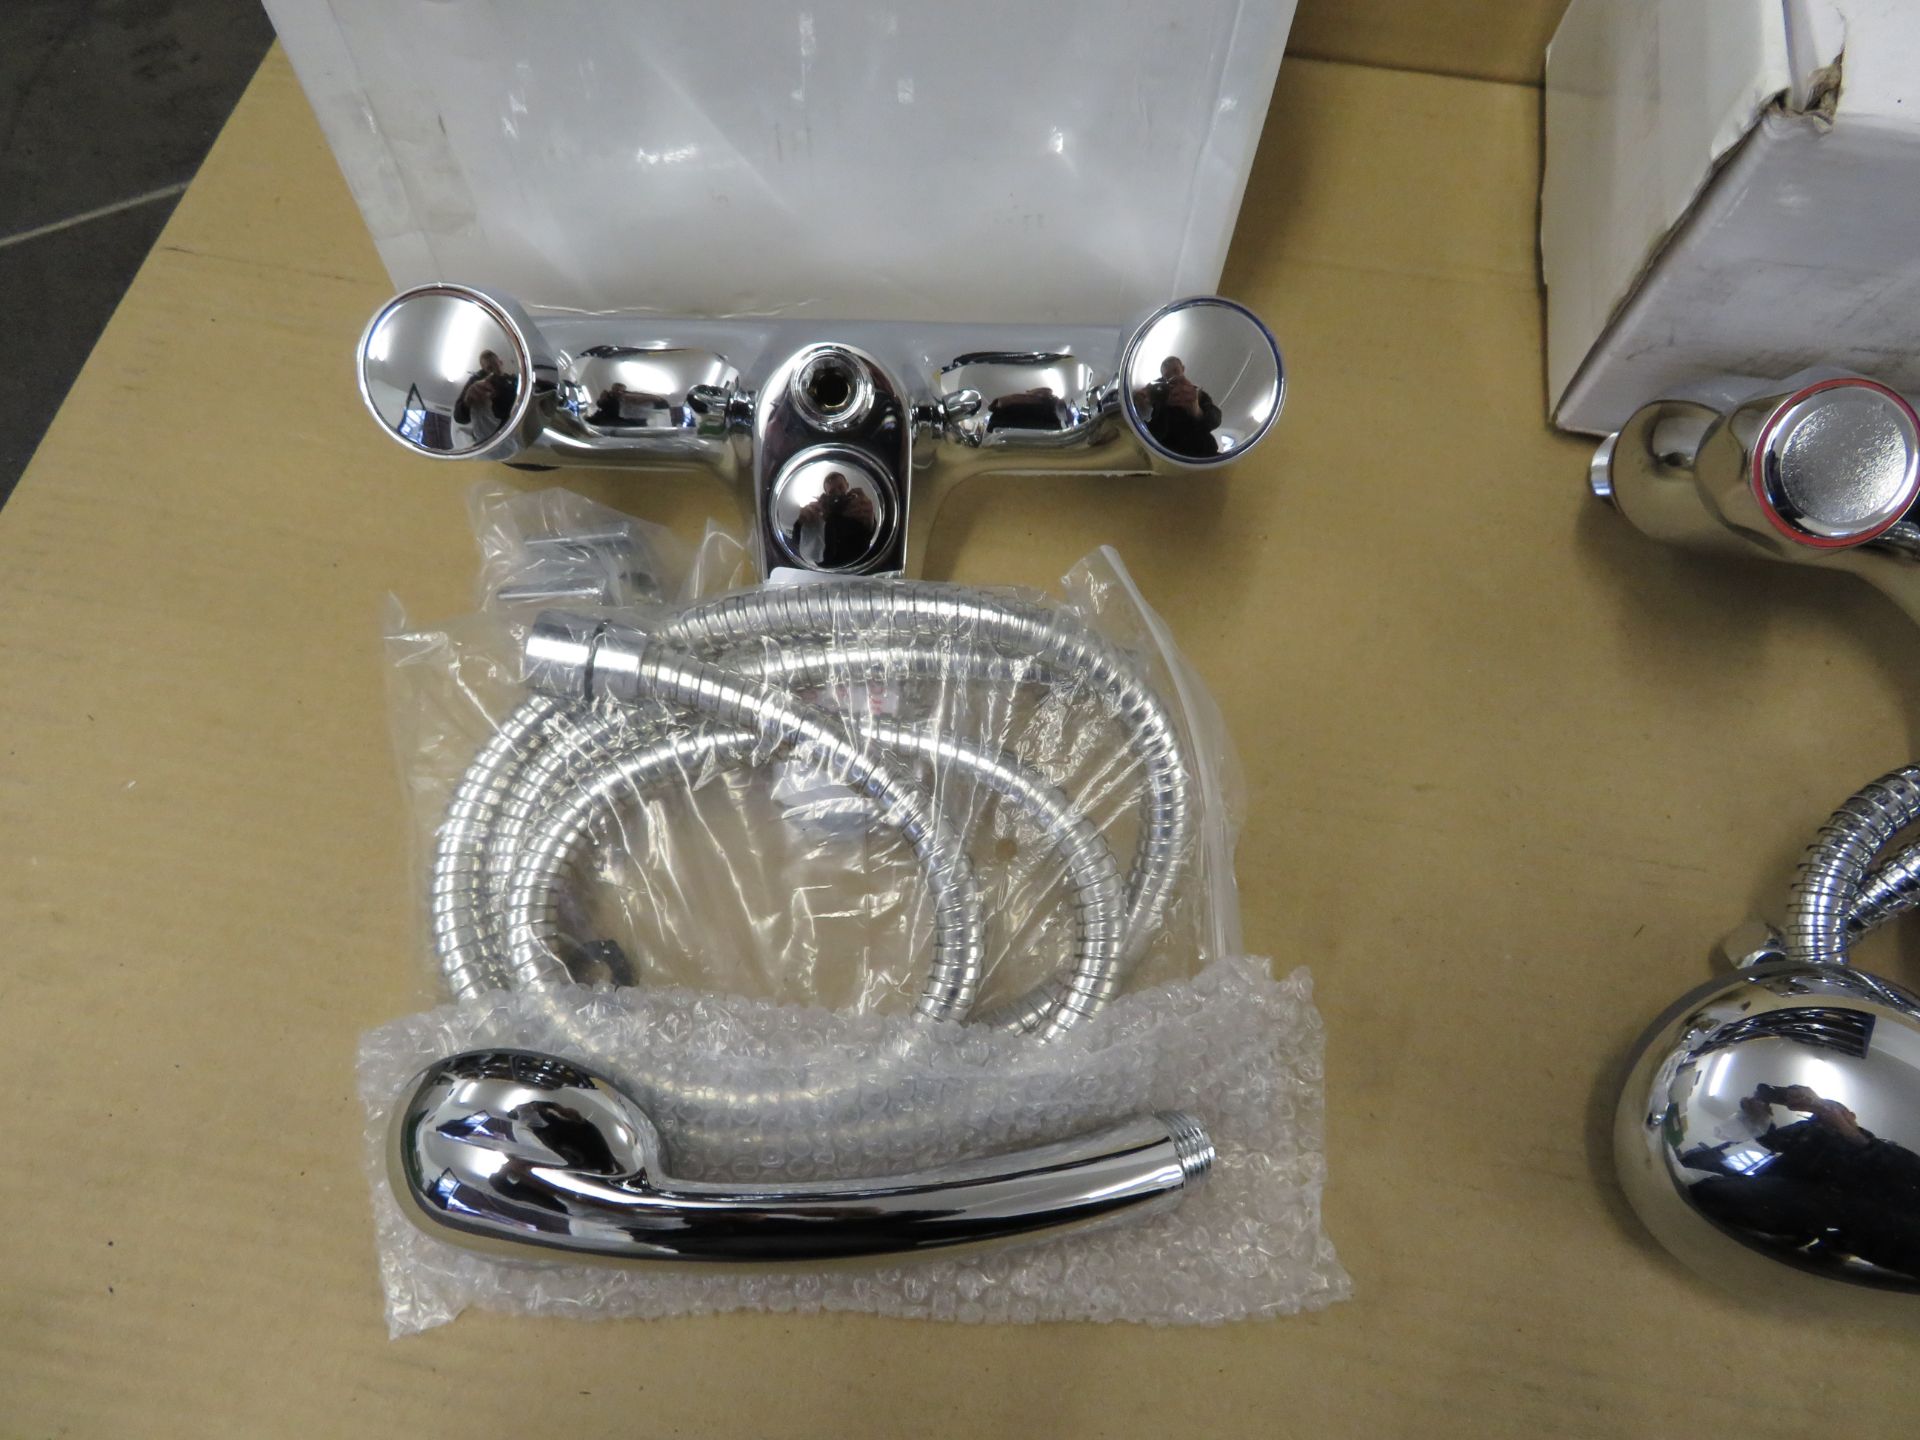 (T4) 3 X Various Brand New Swan Bath Mixer Taps With Shower. Total Lot Rrp £397. Uk Delivery - Image 2 of 4